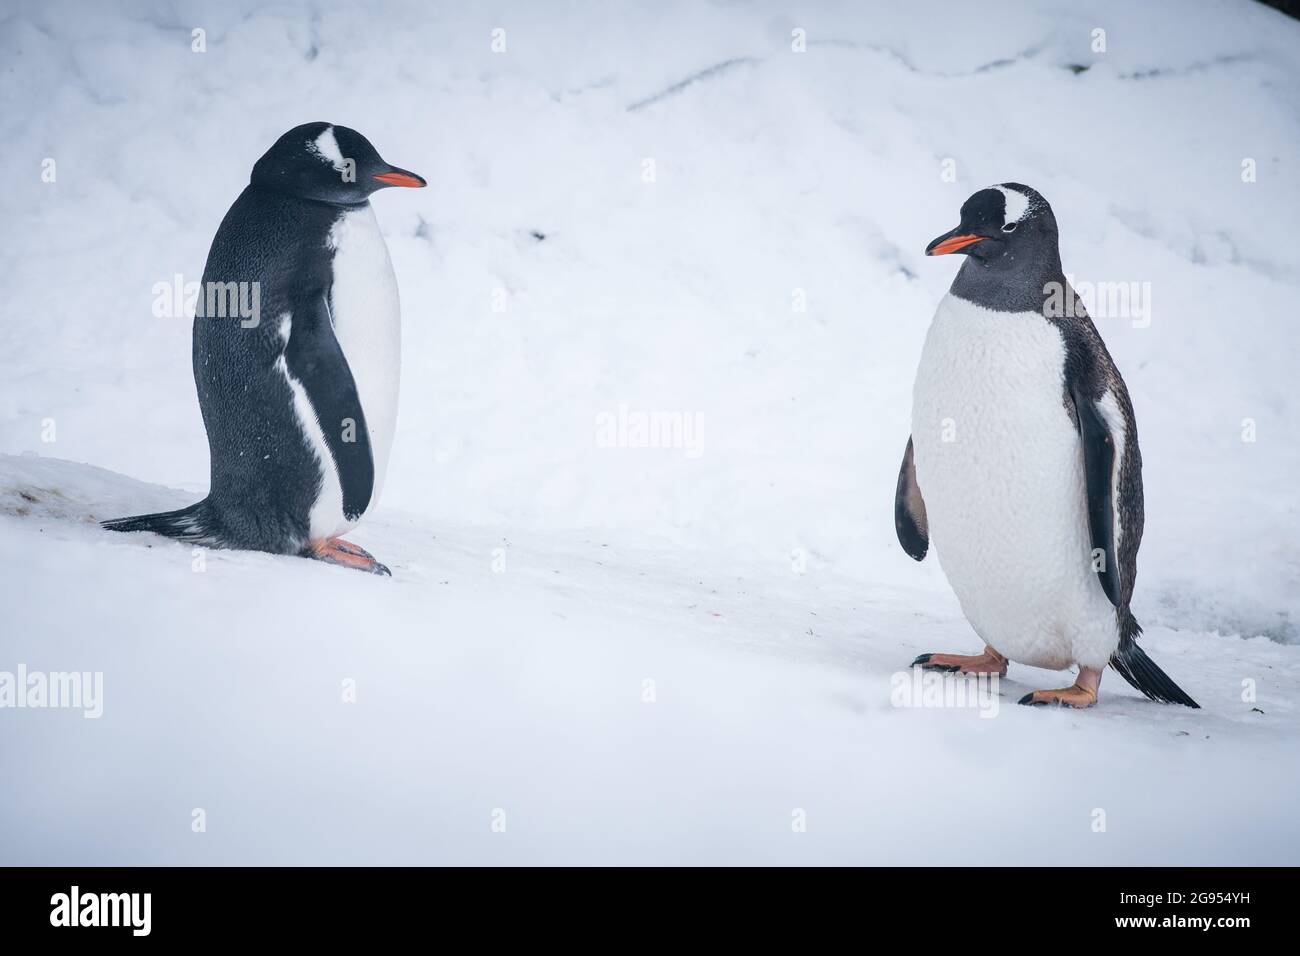 Two gentoo penguins stand on a snow covered slope, one sleeping one awake in Grahamland, Antarctica. Stock Photo